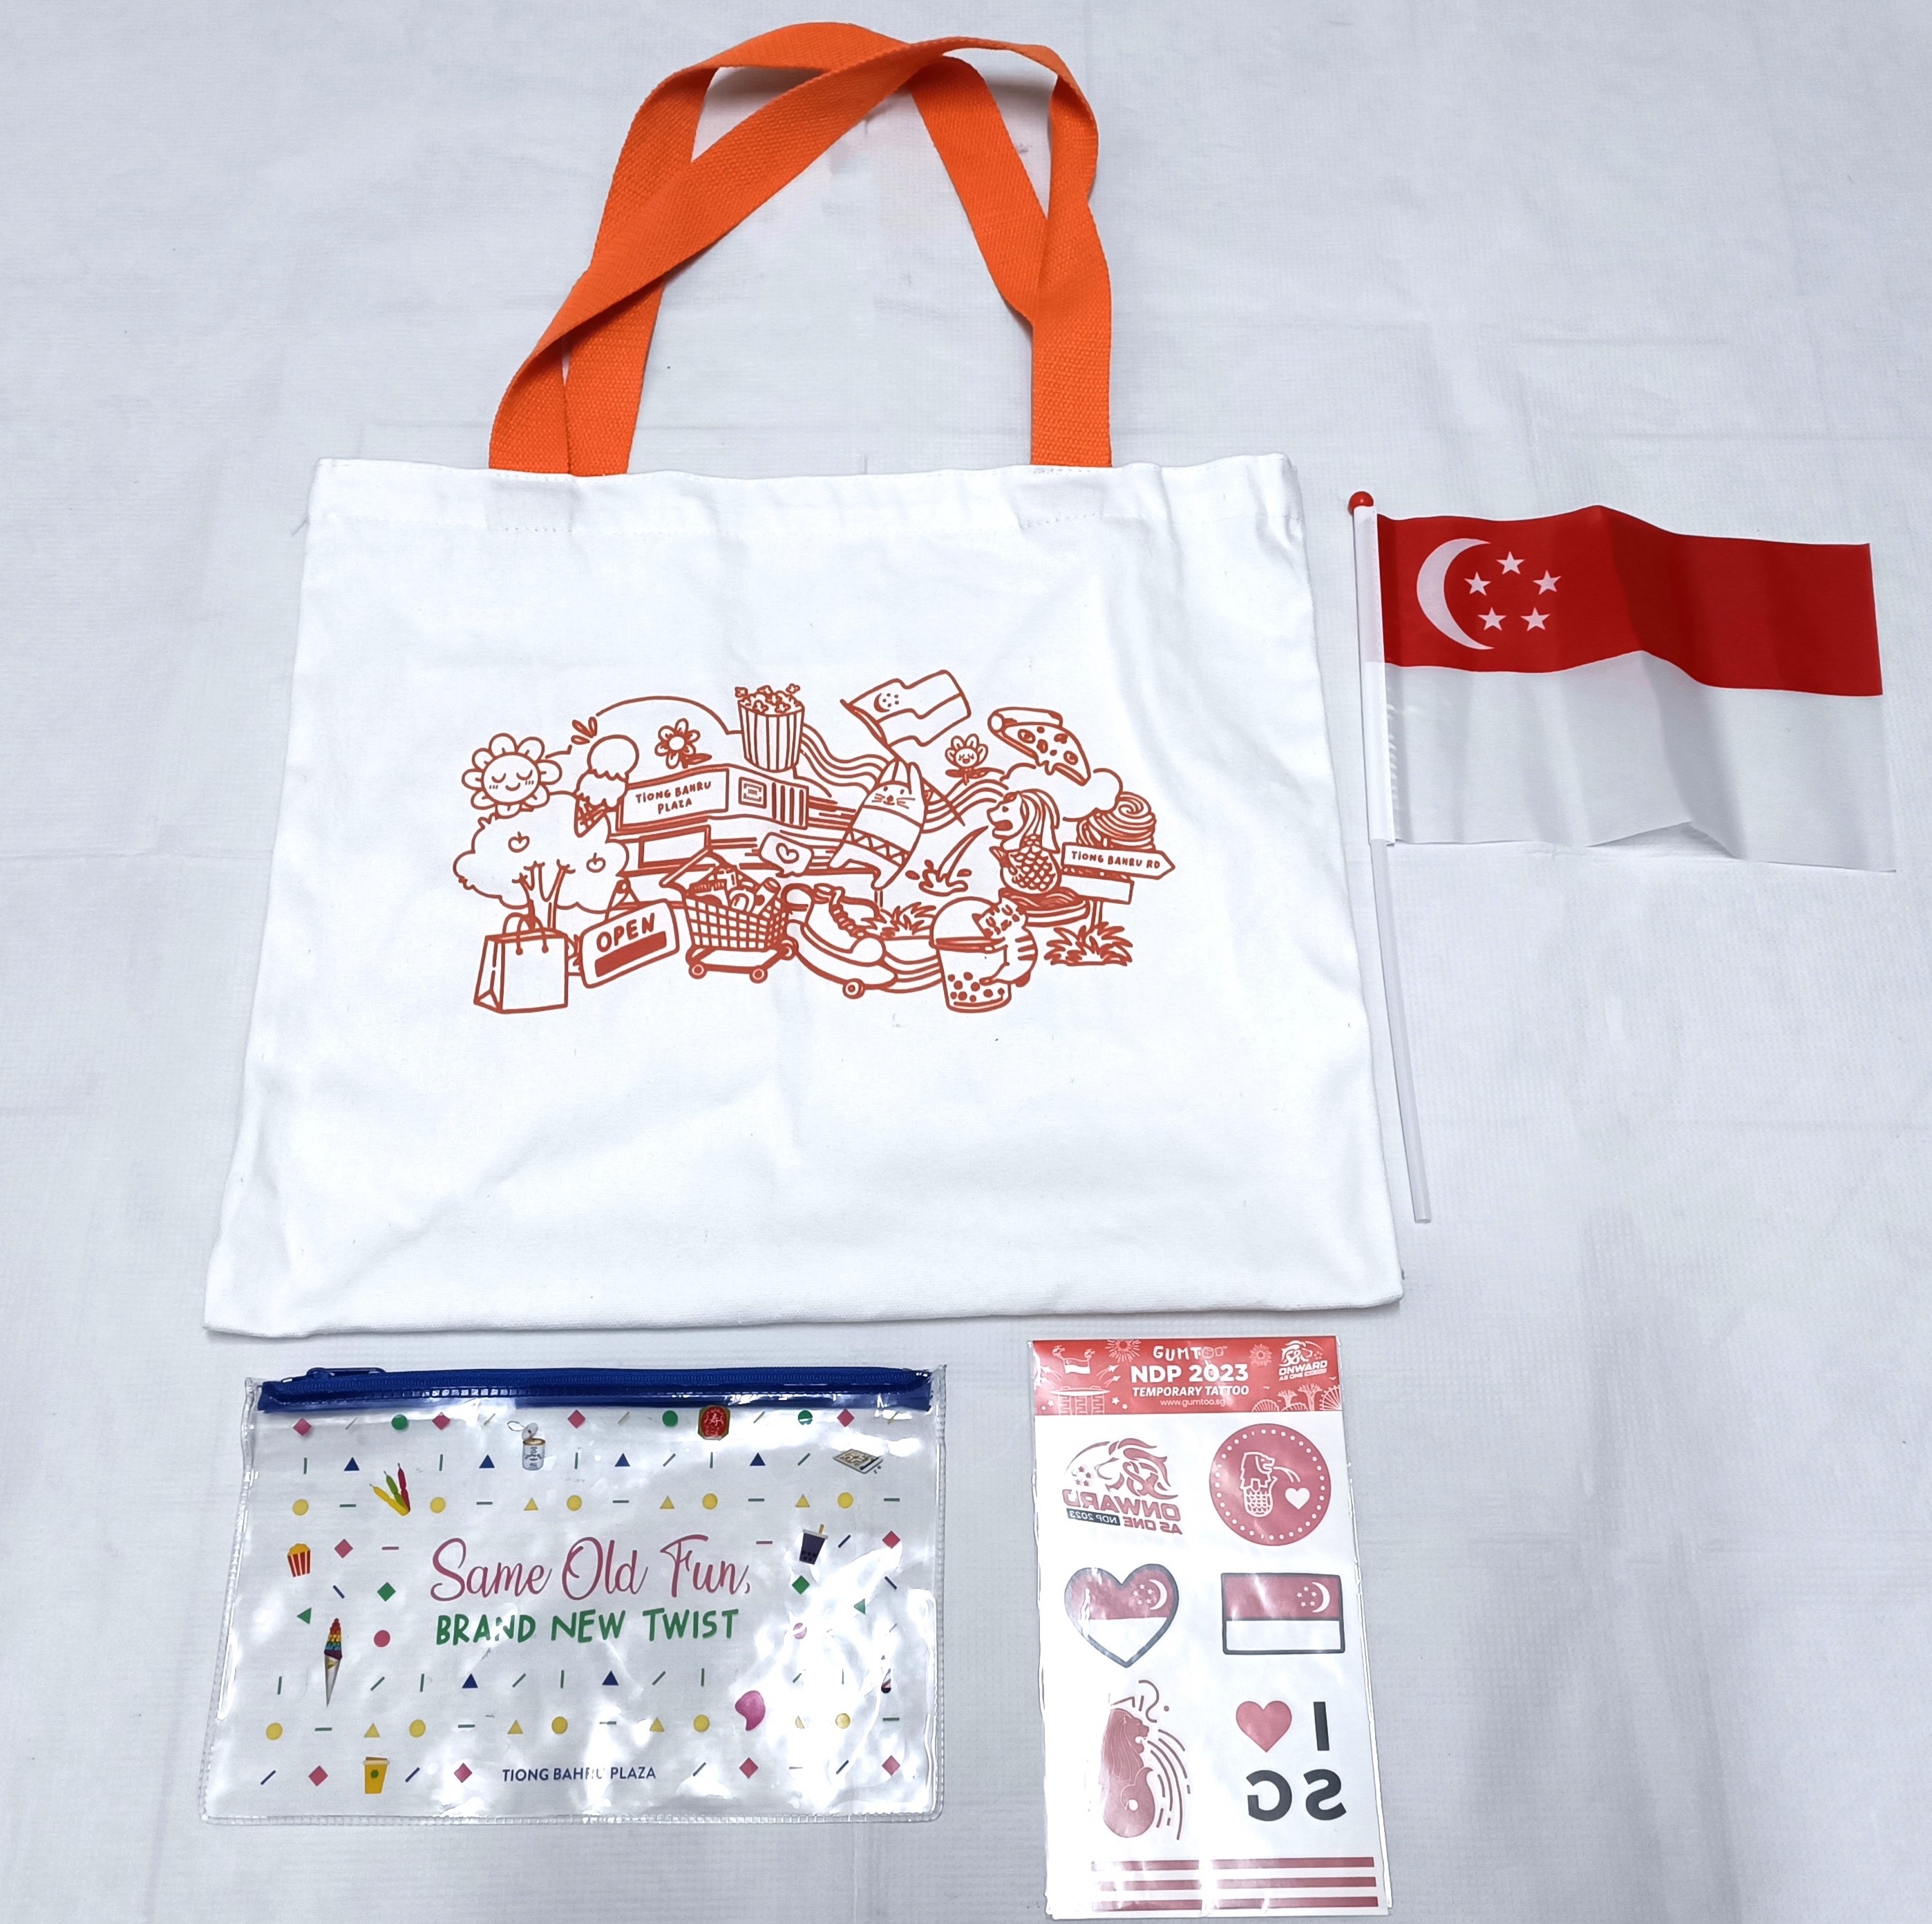 Merci Tote Bags - Best Price in Singapore - Oct 2023